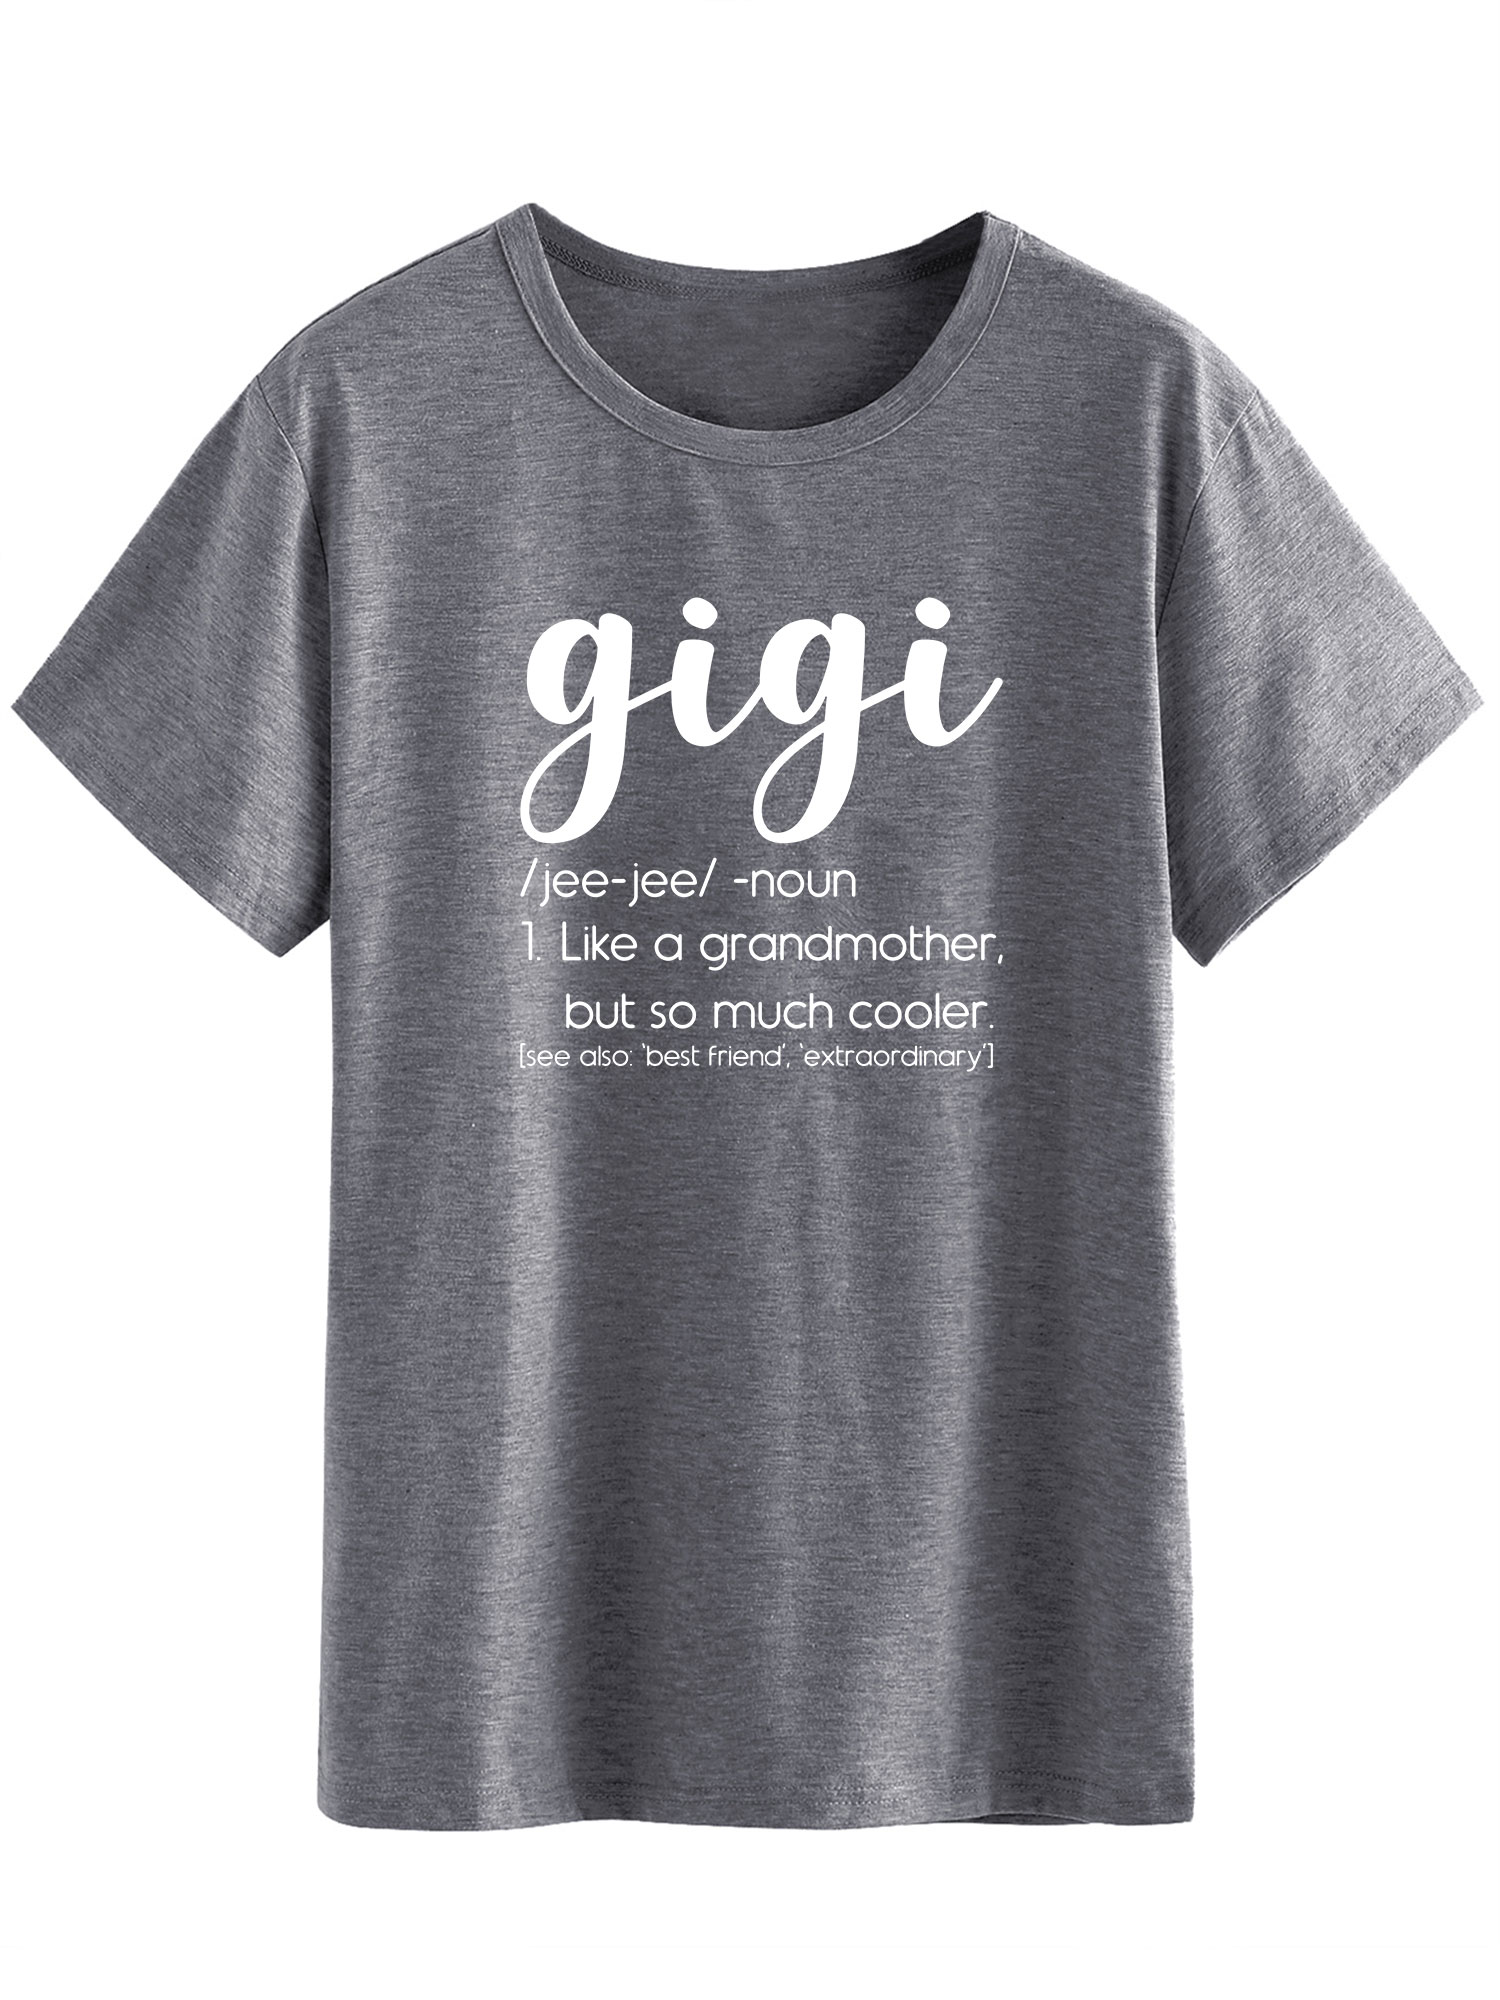 TWZH Women Gigi Jee Jee Noun Like A Grandmother But So Much Cooler T-shirts - image 3 of 6